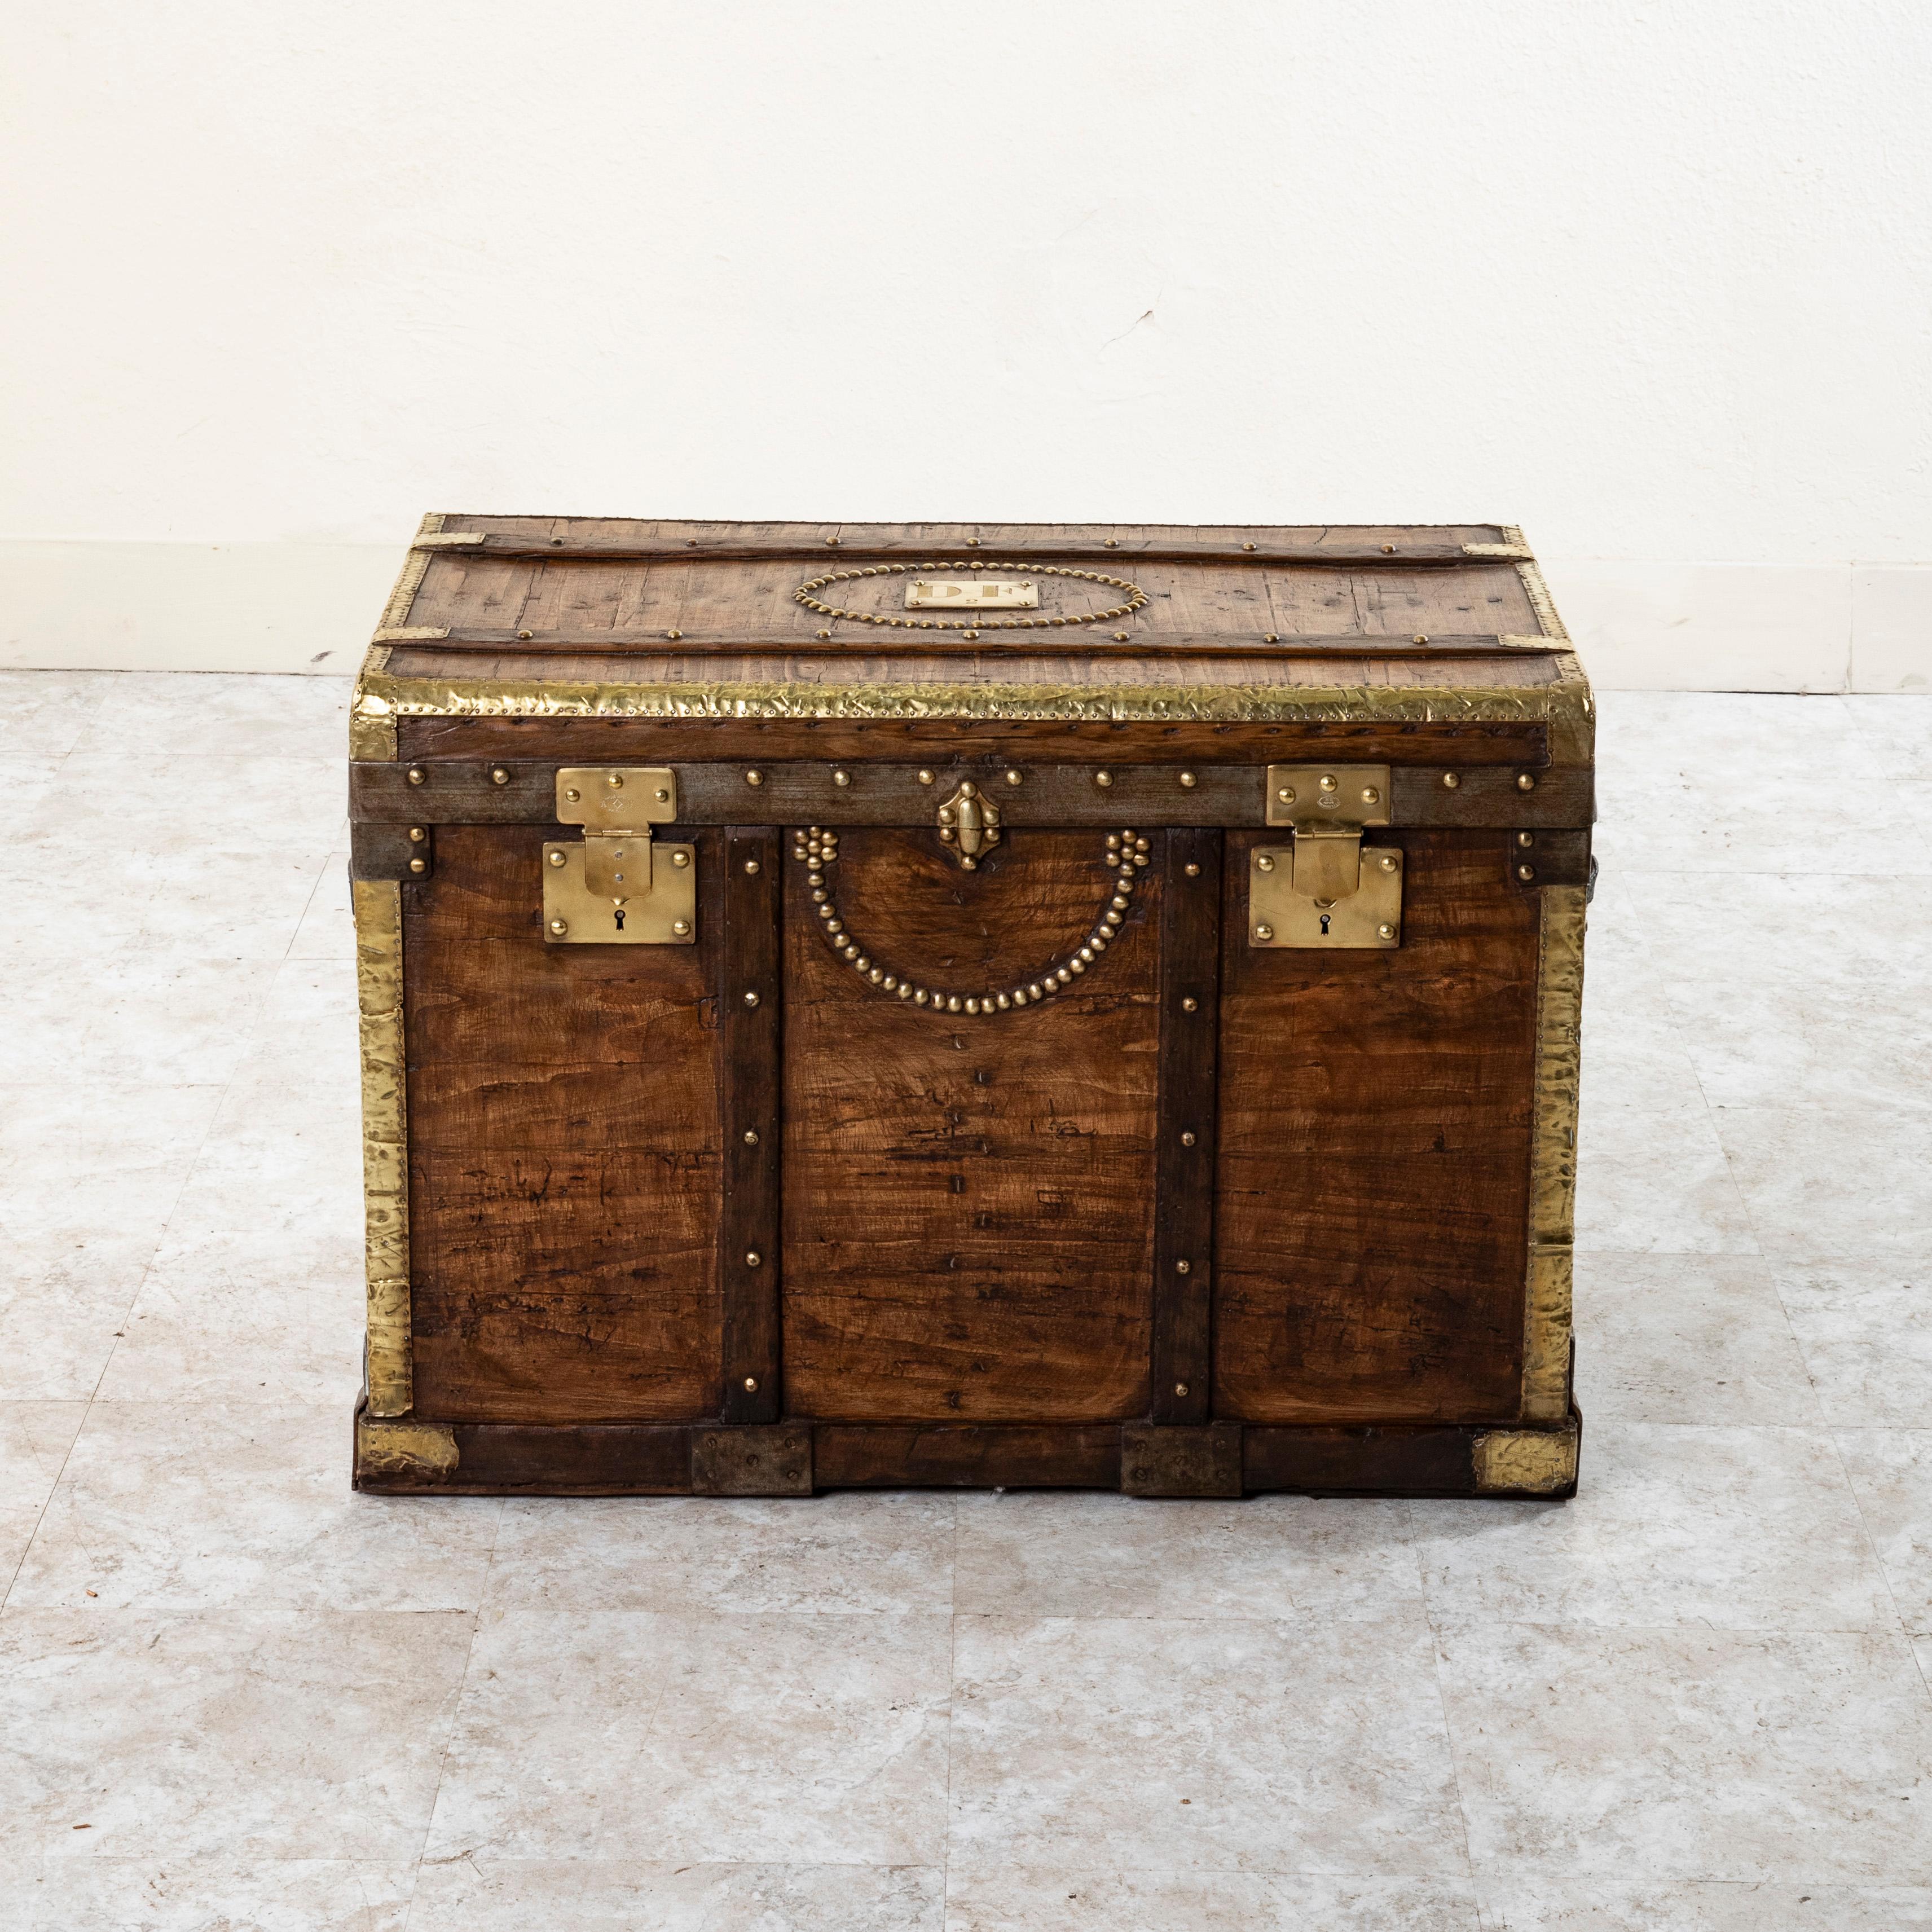 This wooden steam trunk from the late nineteenth century features locks stamped Depose, or trademarked, as well as a brass plaque on the top marked with initials DF and the number 2. Its wooden runners with brass rivets and brass corners offered